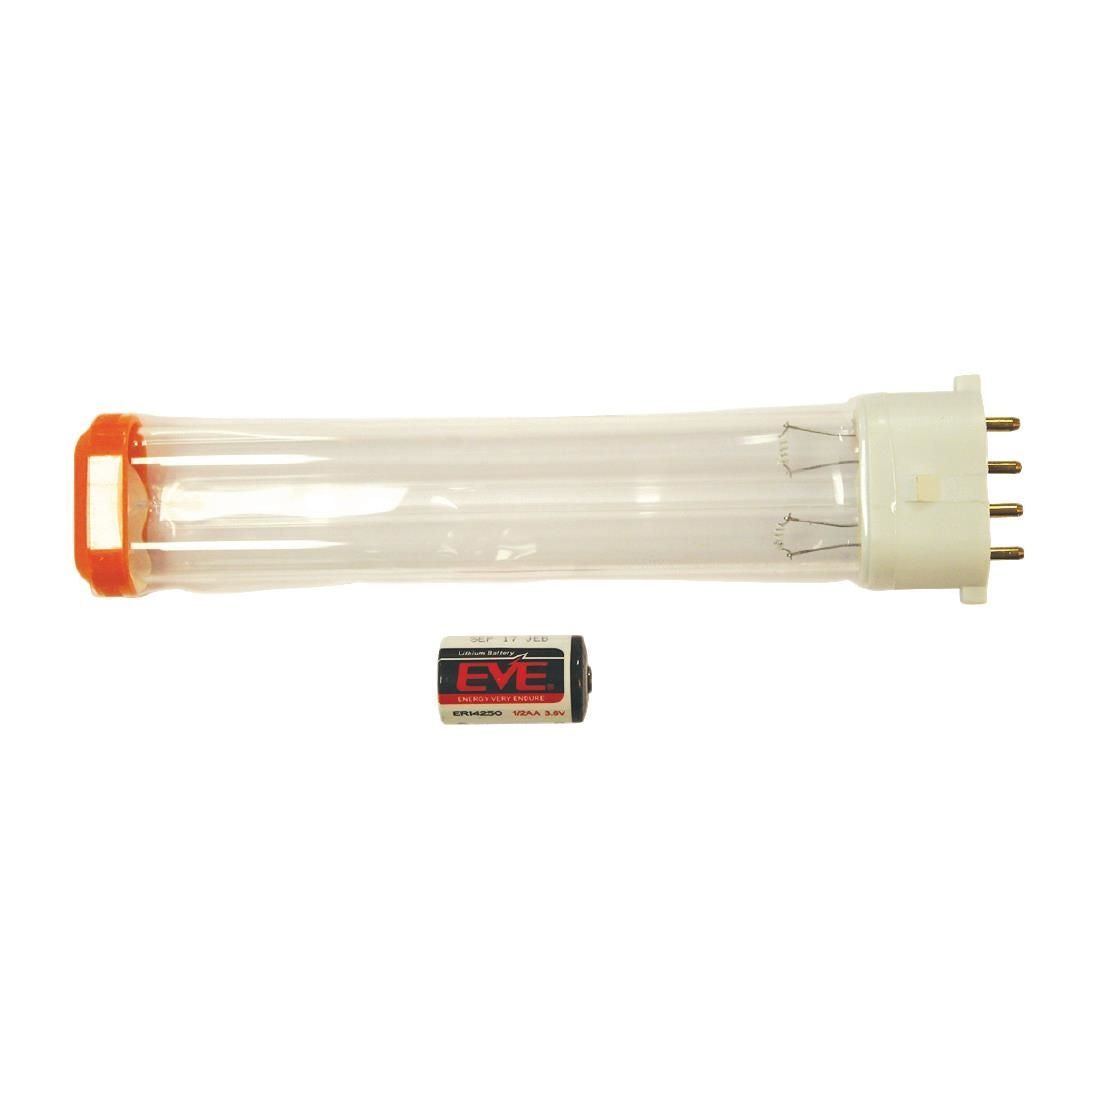 FE691 HyGenikx System Shatter-proof Replacement Lamp and Battery Orange Cap HGX-10-F JD Catering Equipment Solutions Ltd